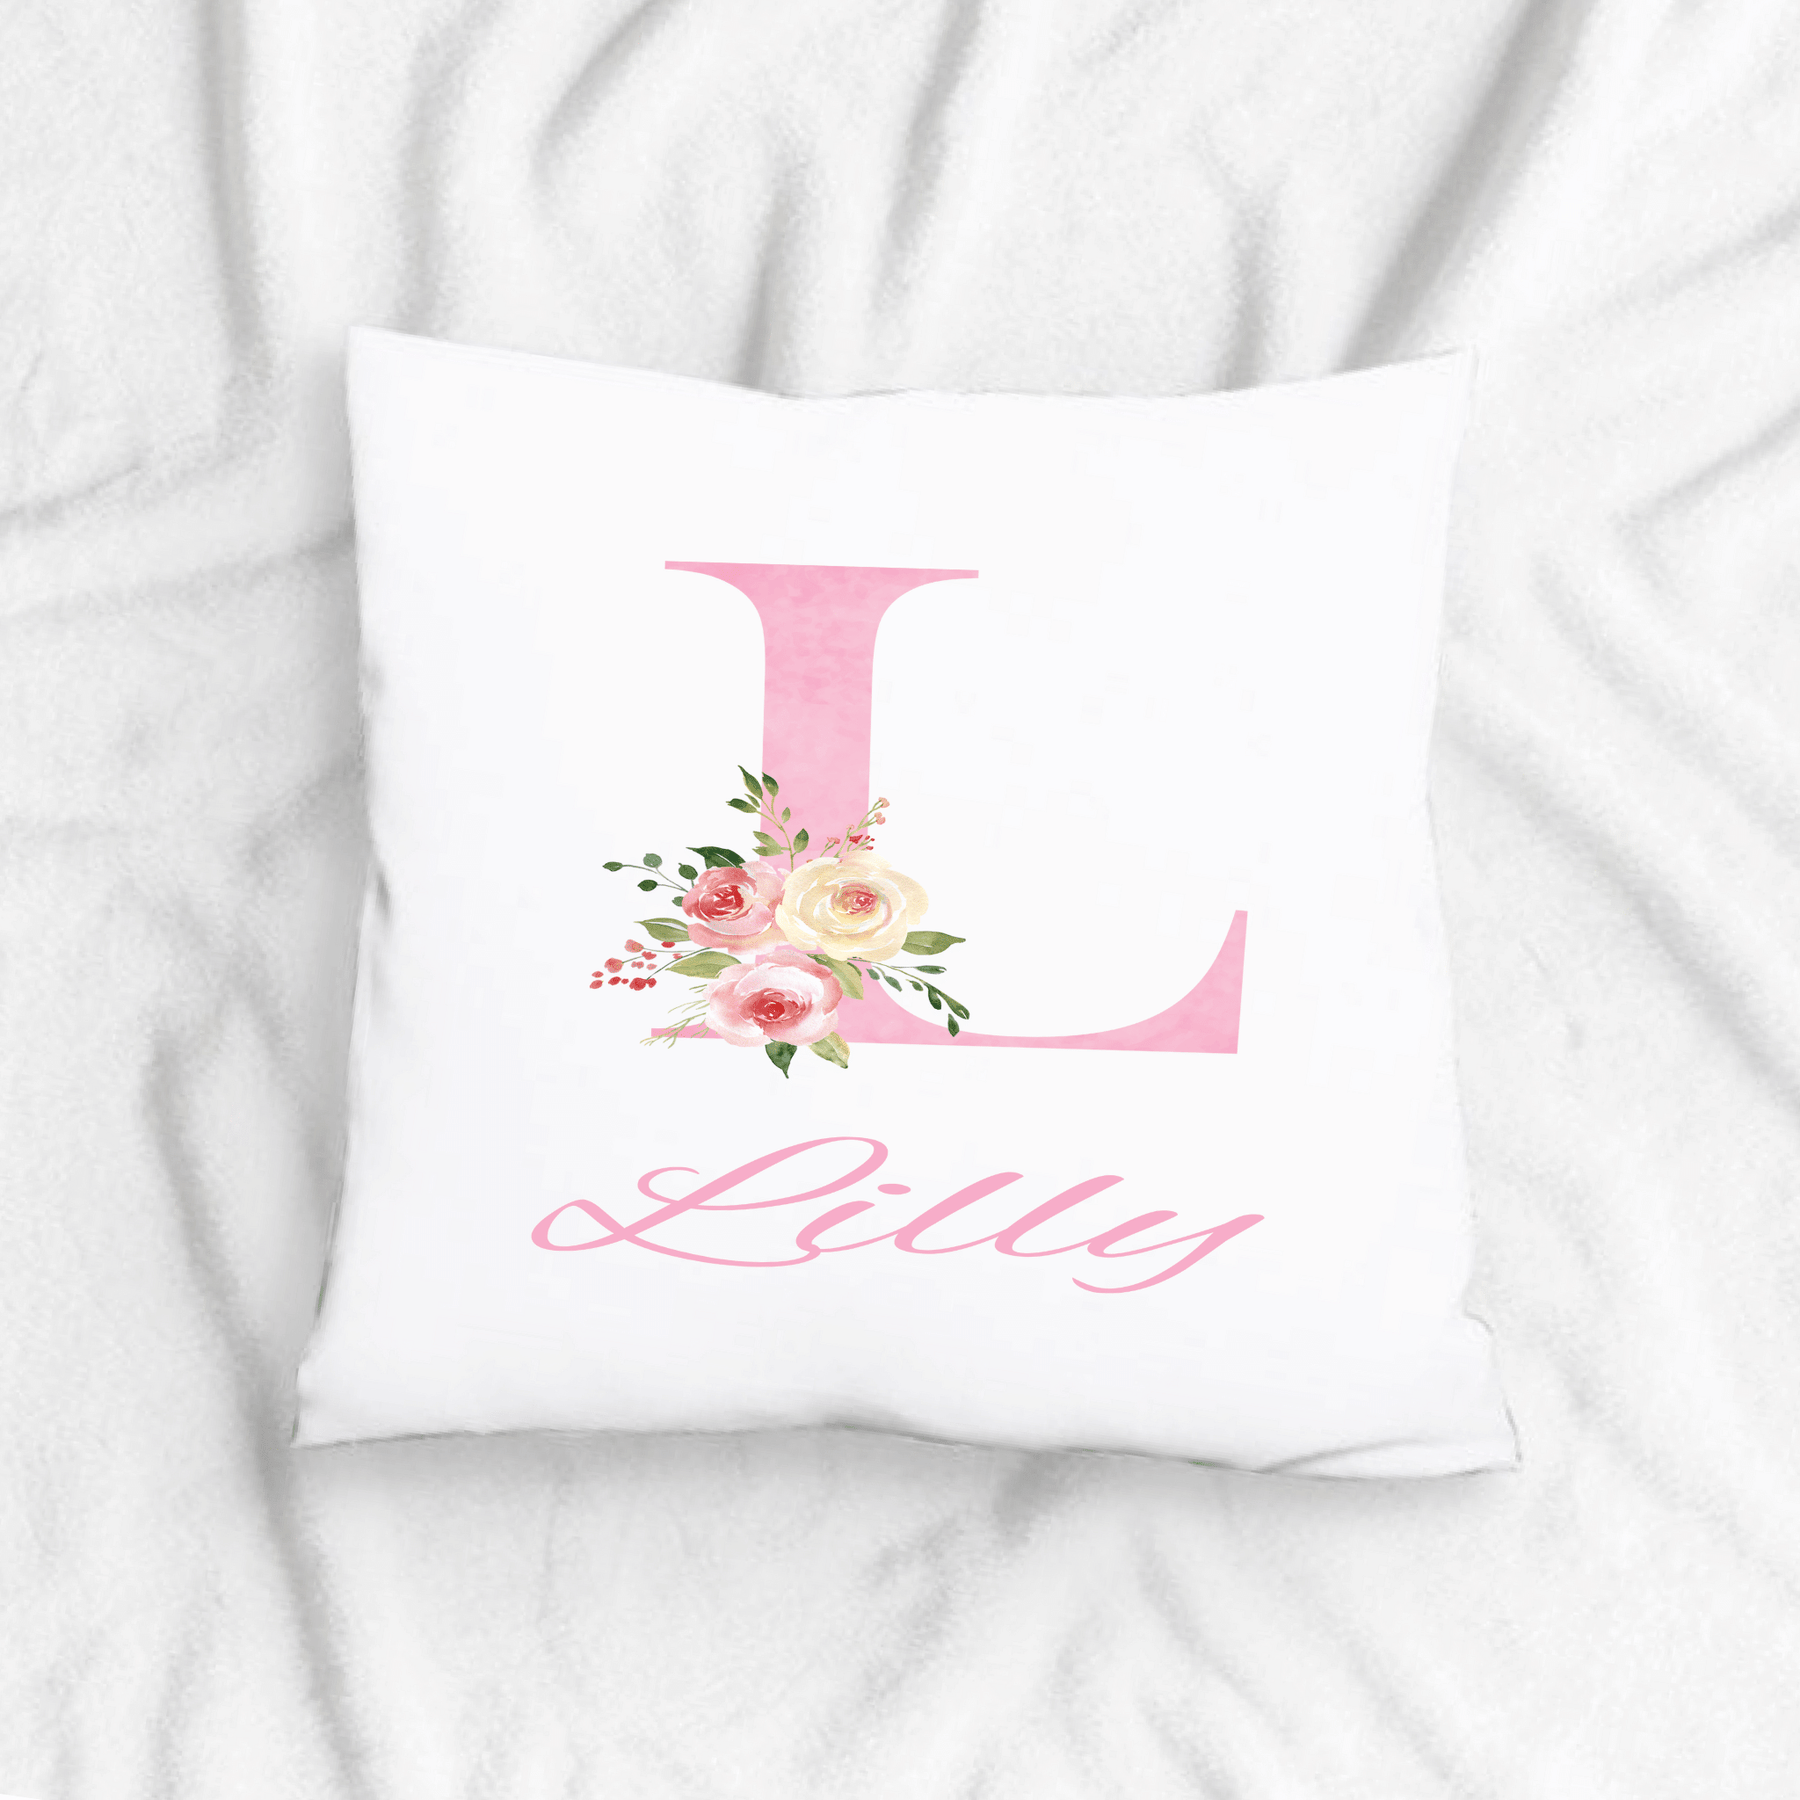 Lil Green Rhino name pillow PINK LETTER PILLOW